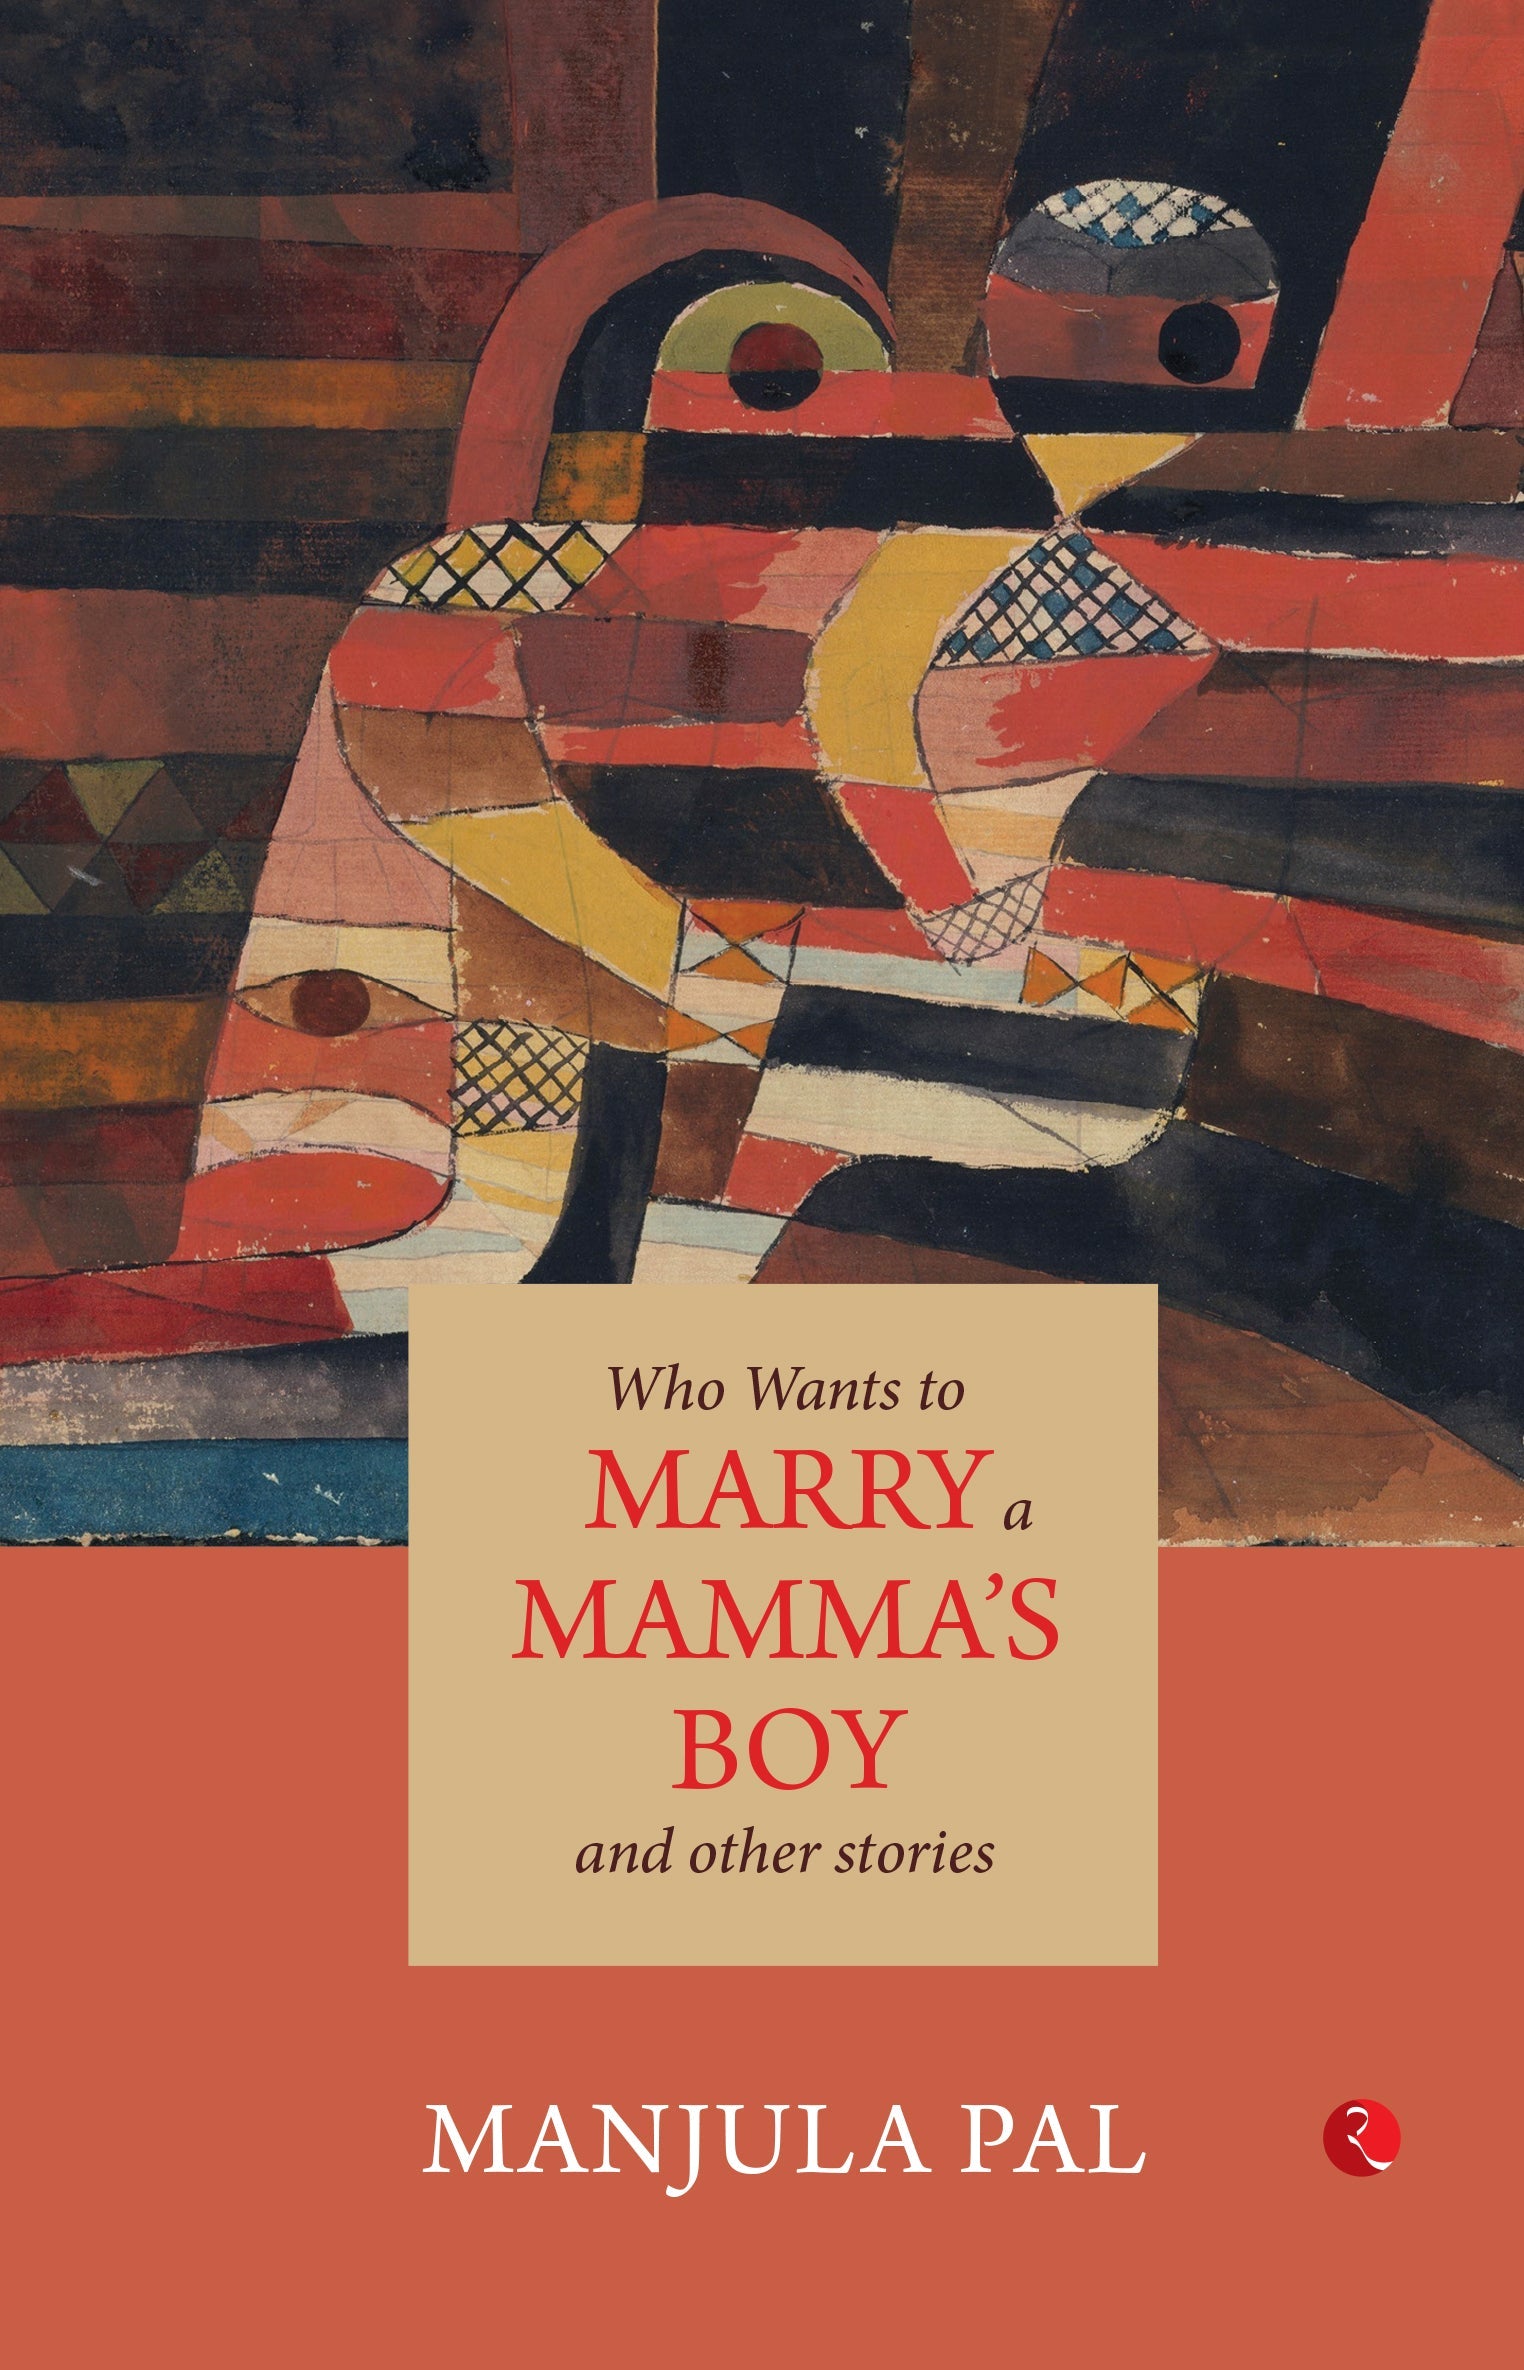 WHO WANTS TO MARRY A MAMMA'S BOY (PB)